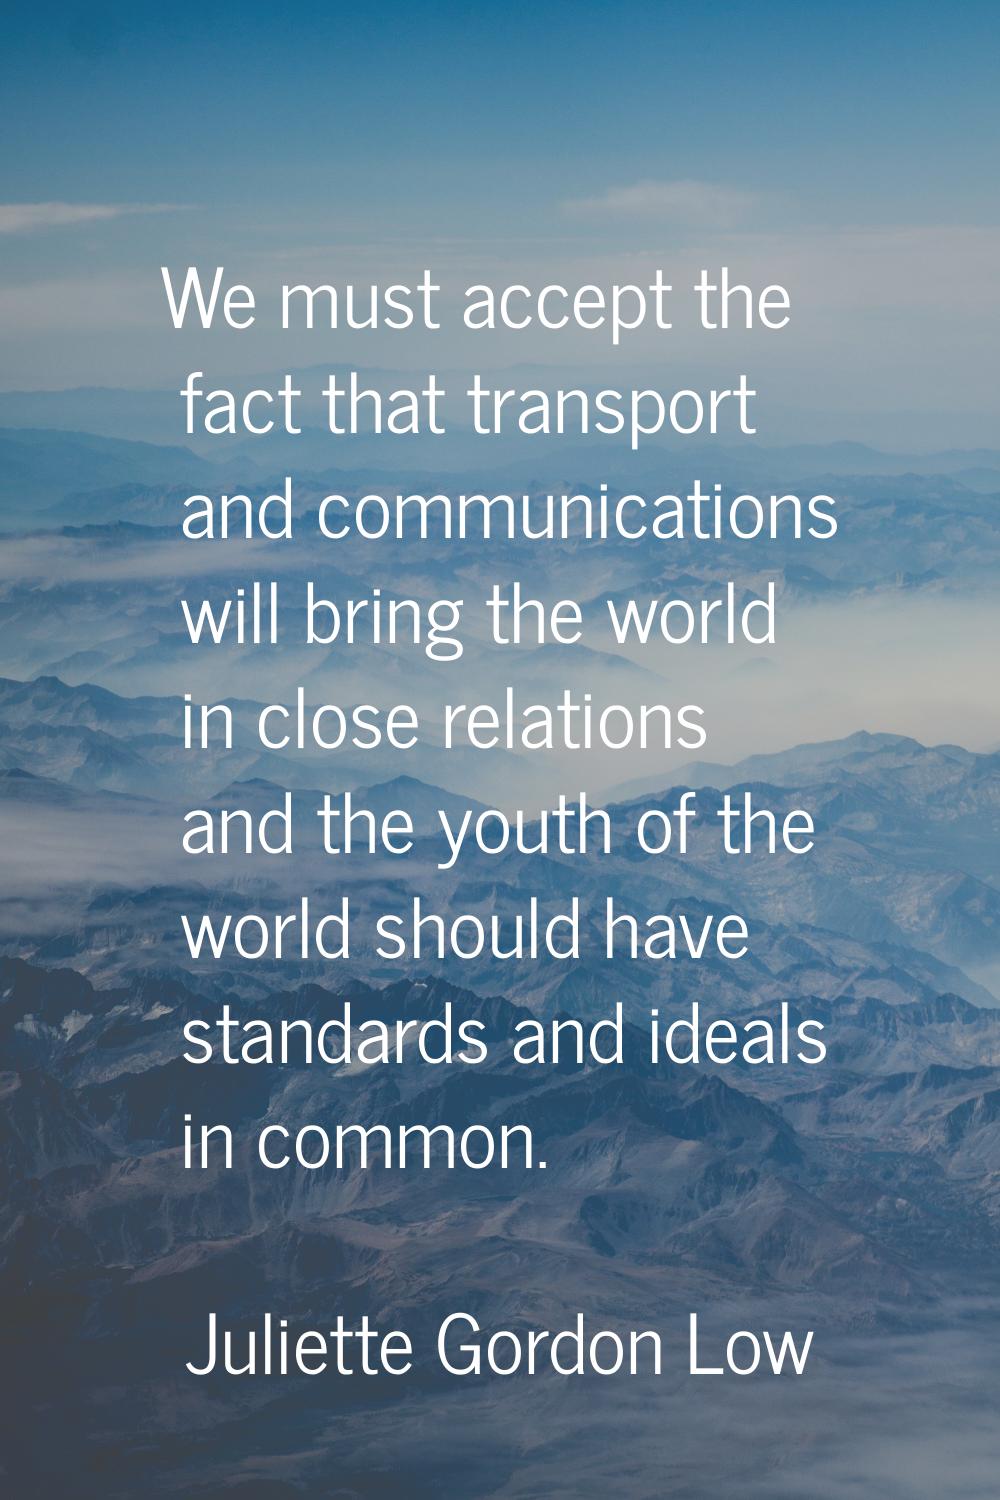 We must accept the fact that transport and communications will bring the world in close relations a